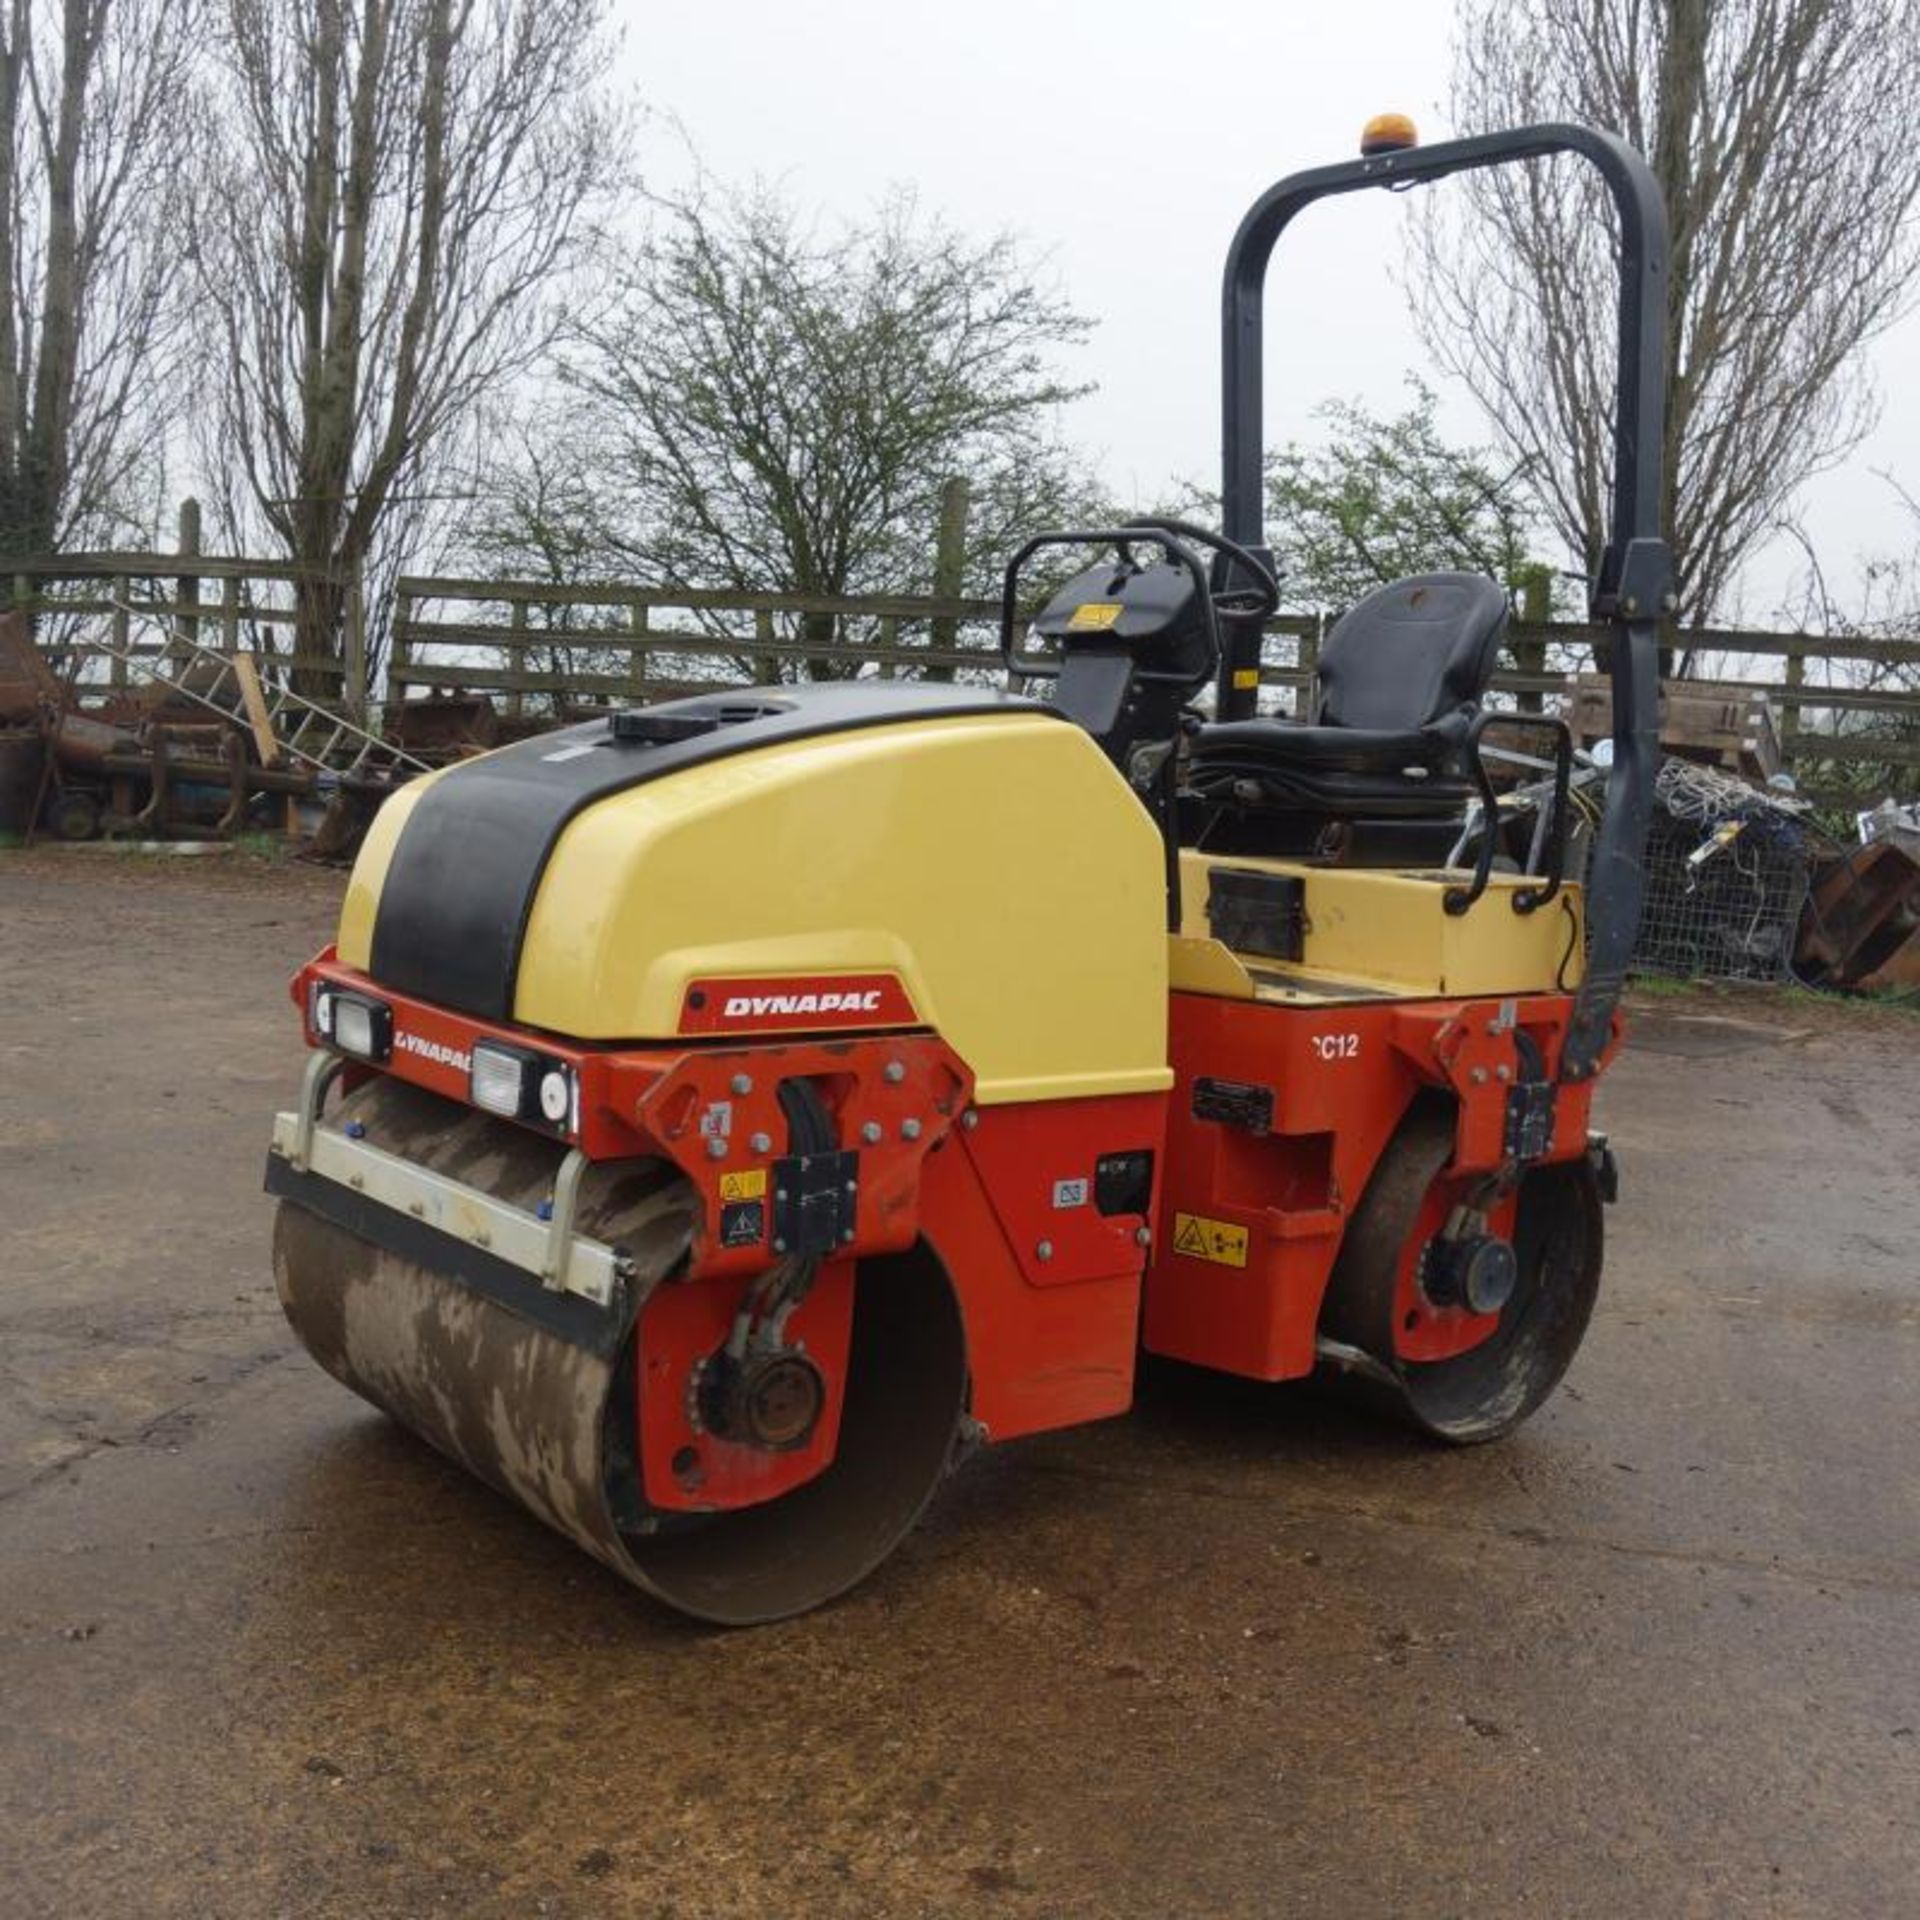 2012 Dynapac Cc1200 Roller, Only 479 Hours From New - Image 7 of 10